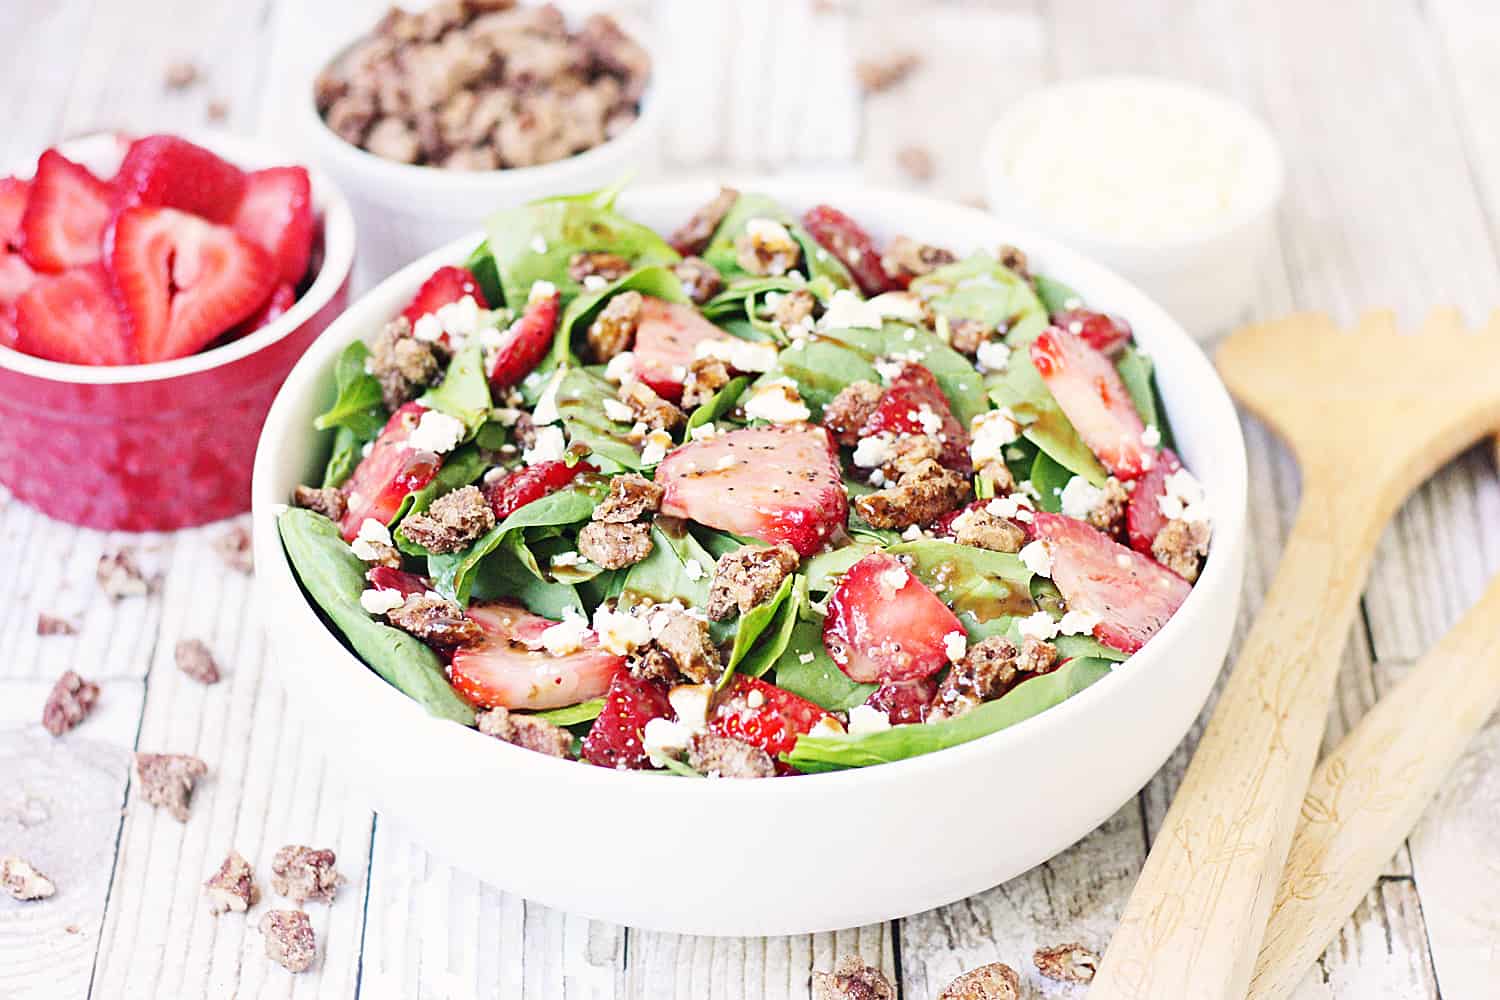 Strawberry Spinach Salad with Balsamic Poppy Seed Dressing -- This strawberry spinach salad boasts baby spinach, fresh strawberries, candied pecans, feta cheese, and the most amazing balsamic poppy seed dressing!